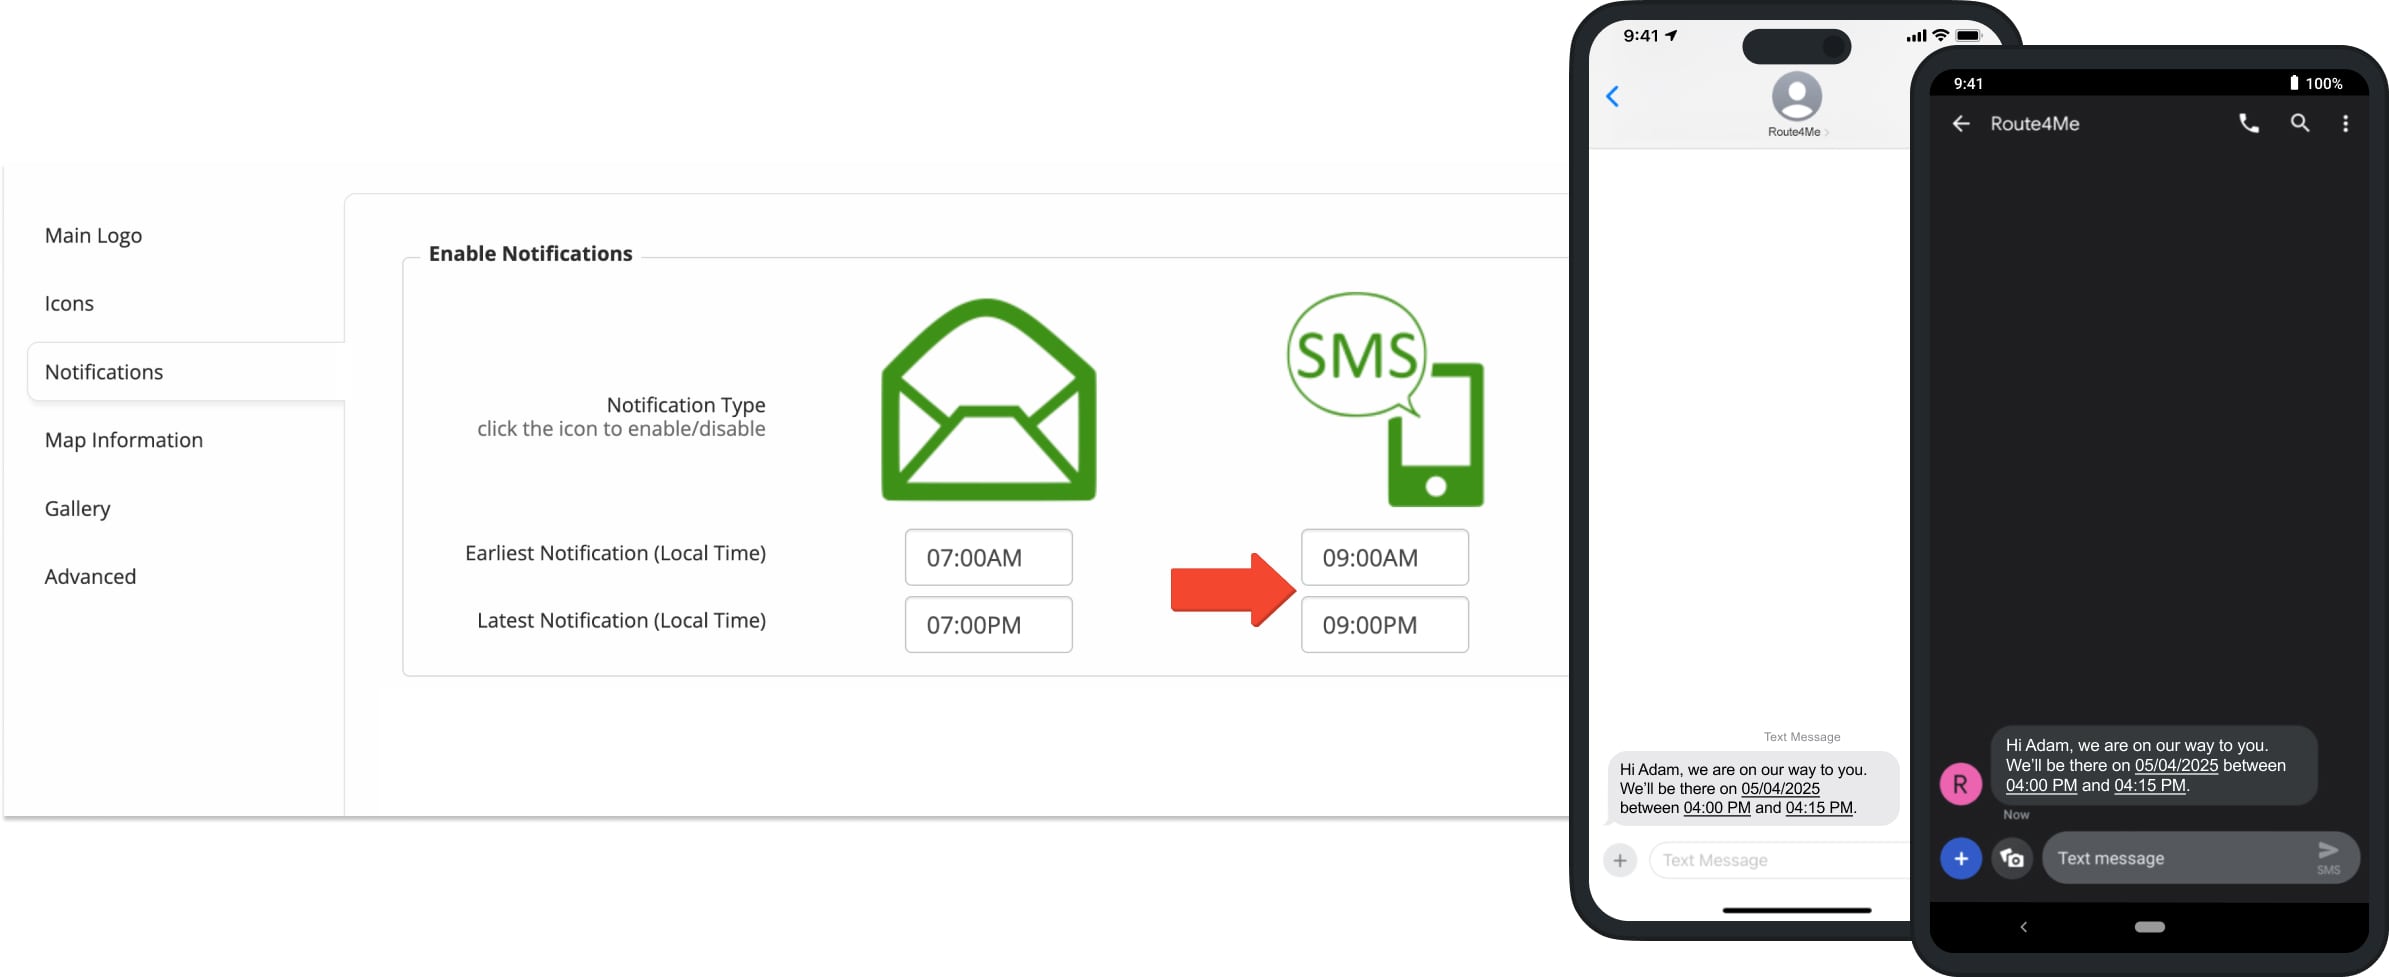 Enable SMS Messaging customer notifications to send automated alerts and notifications in the preferred time window.